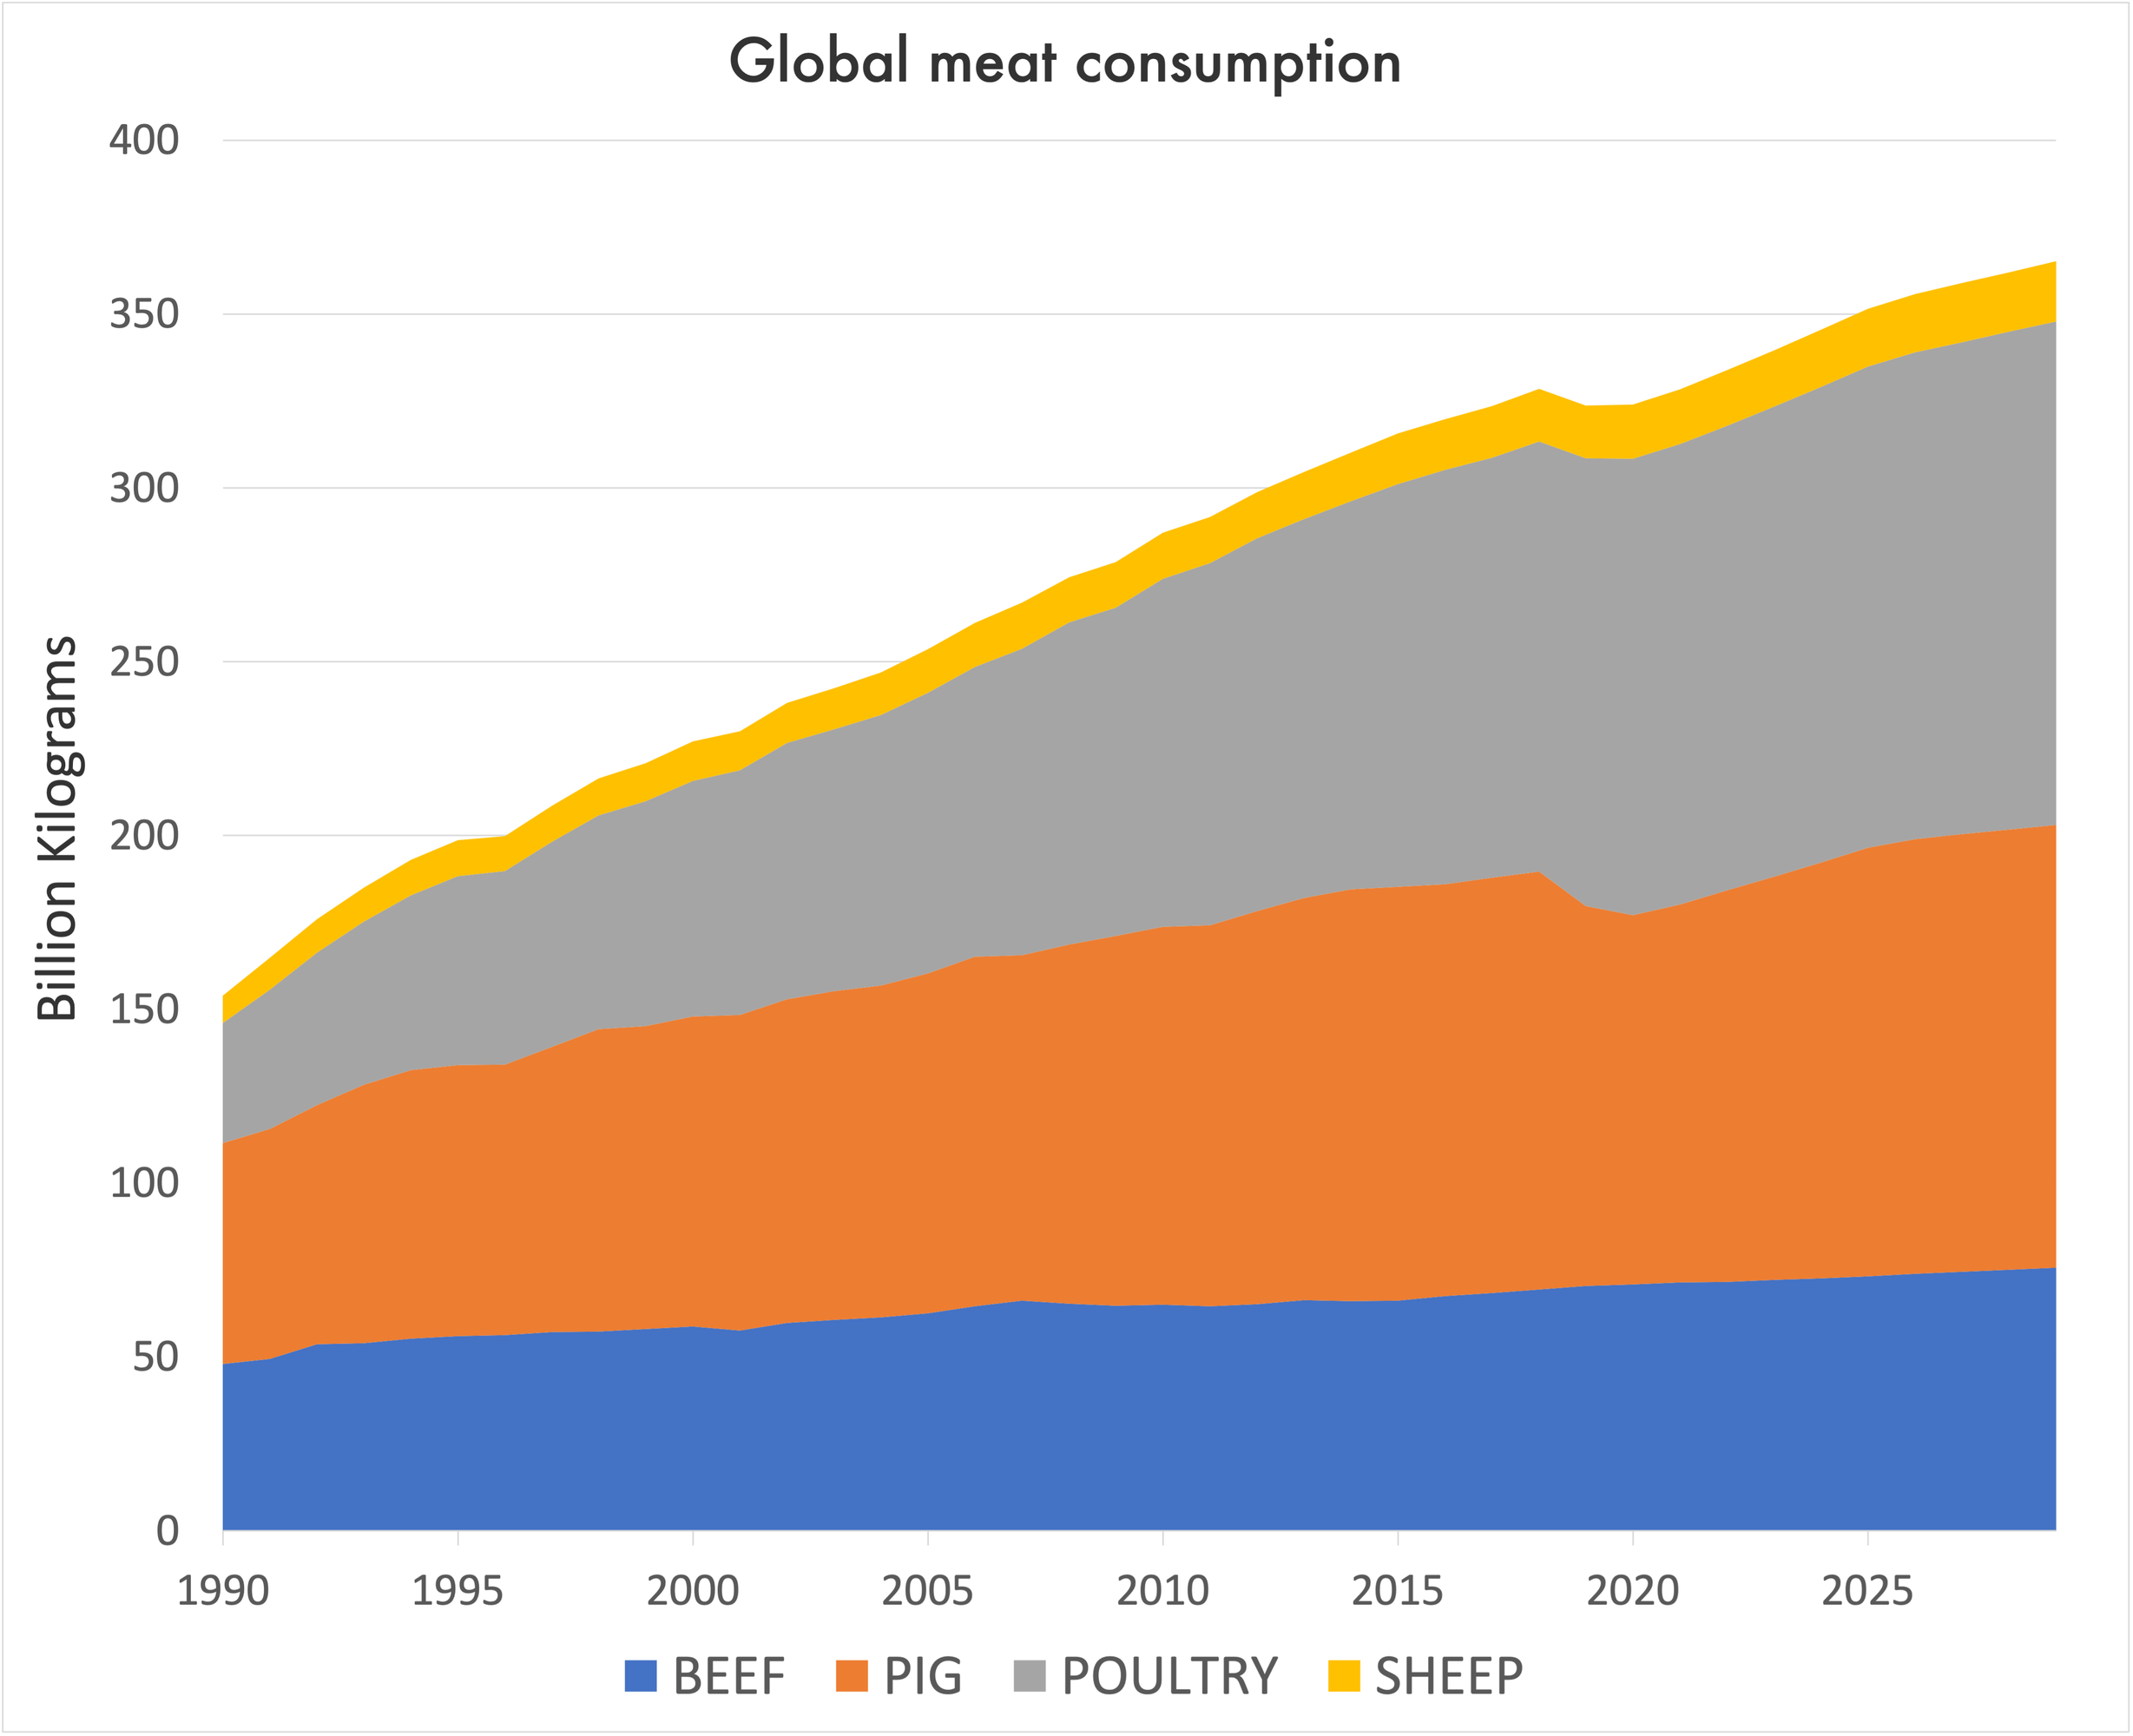 We’re on track to set a new record for global meat consumption